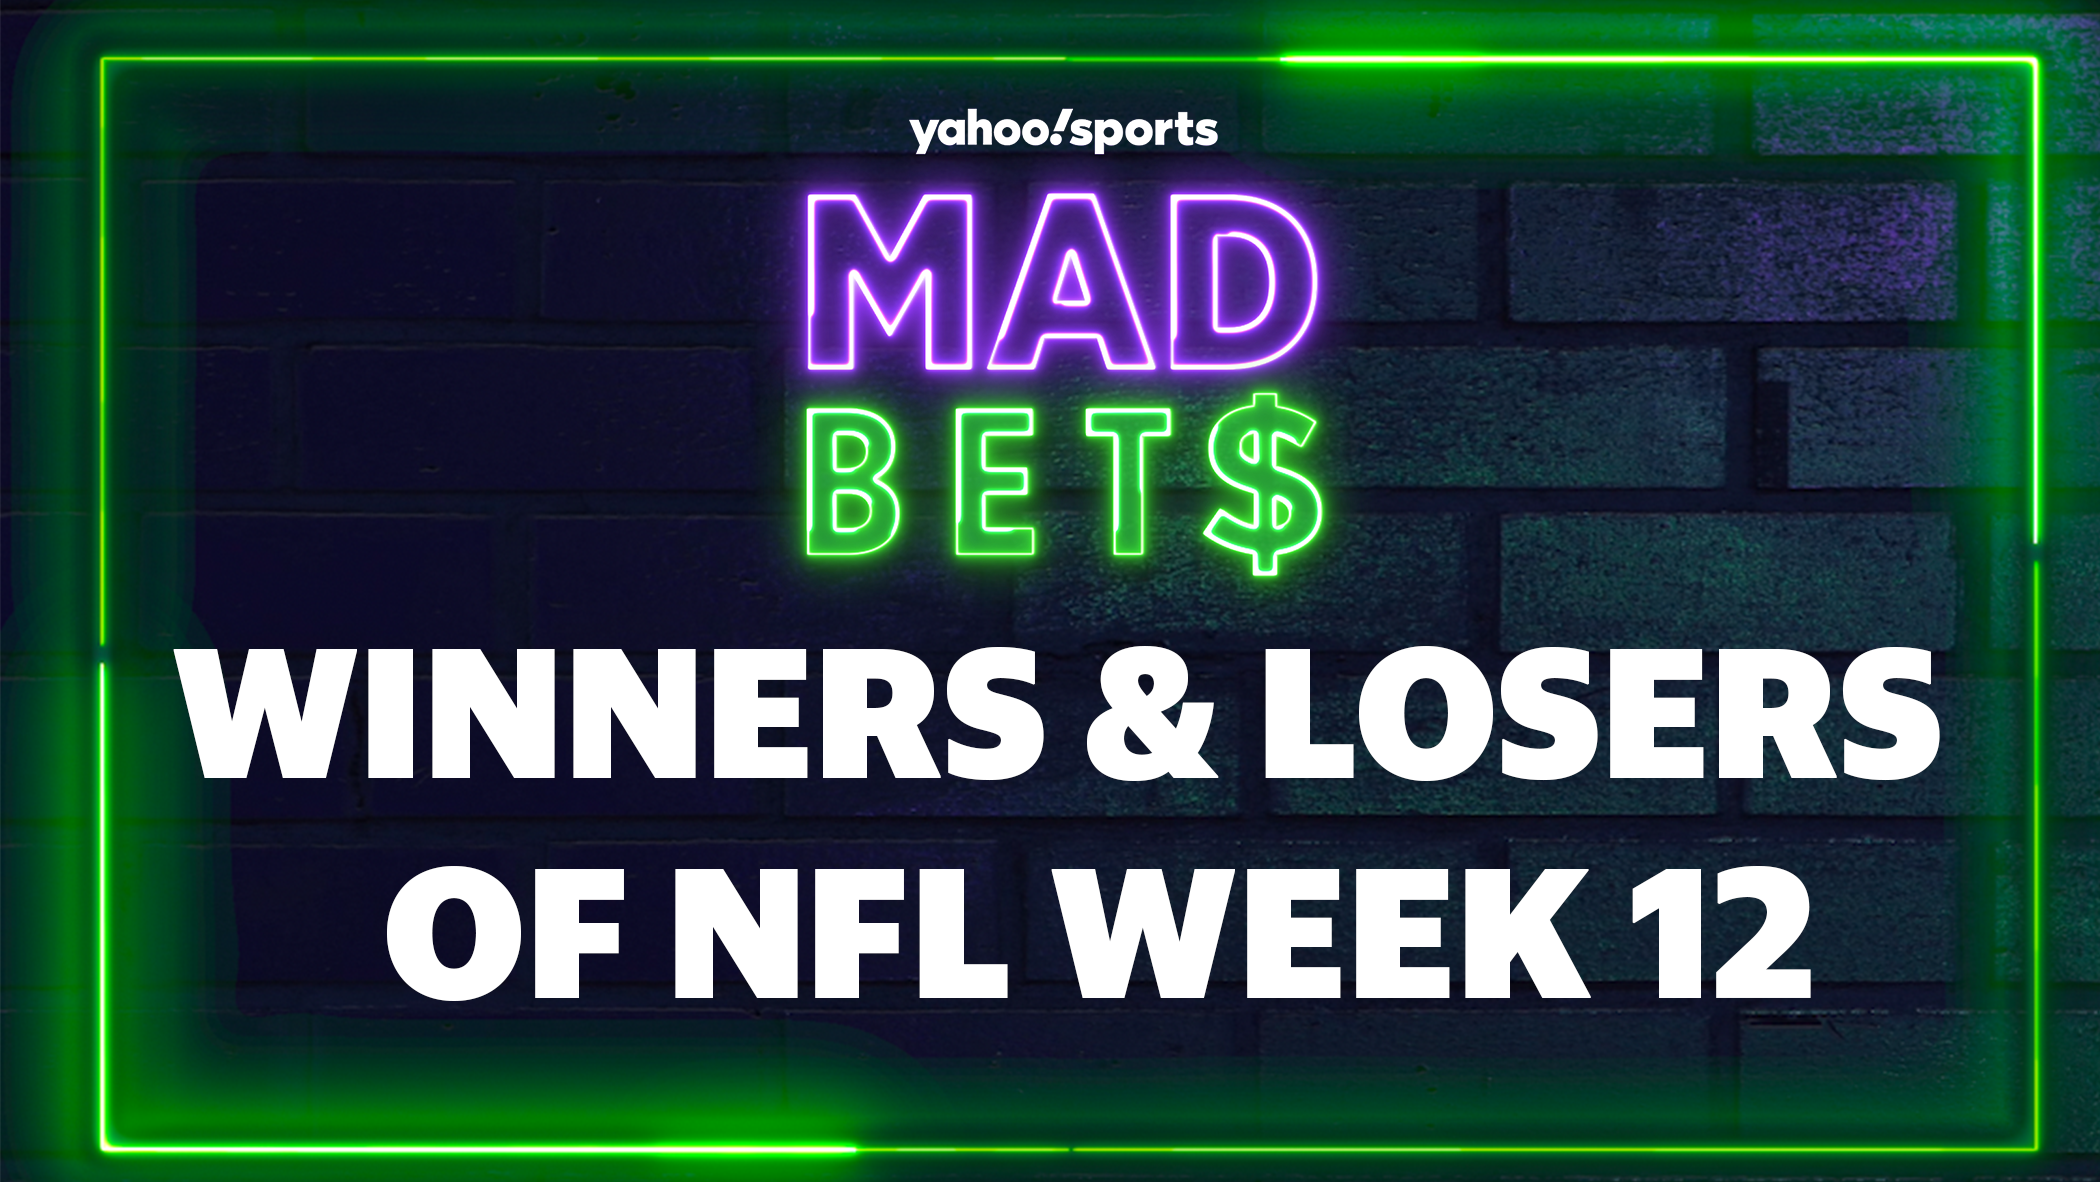 Sports betting winners and losers: A 10-team parlay worth $35,000 came down  to 4 backdoor NFL covers